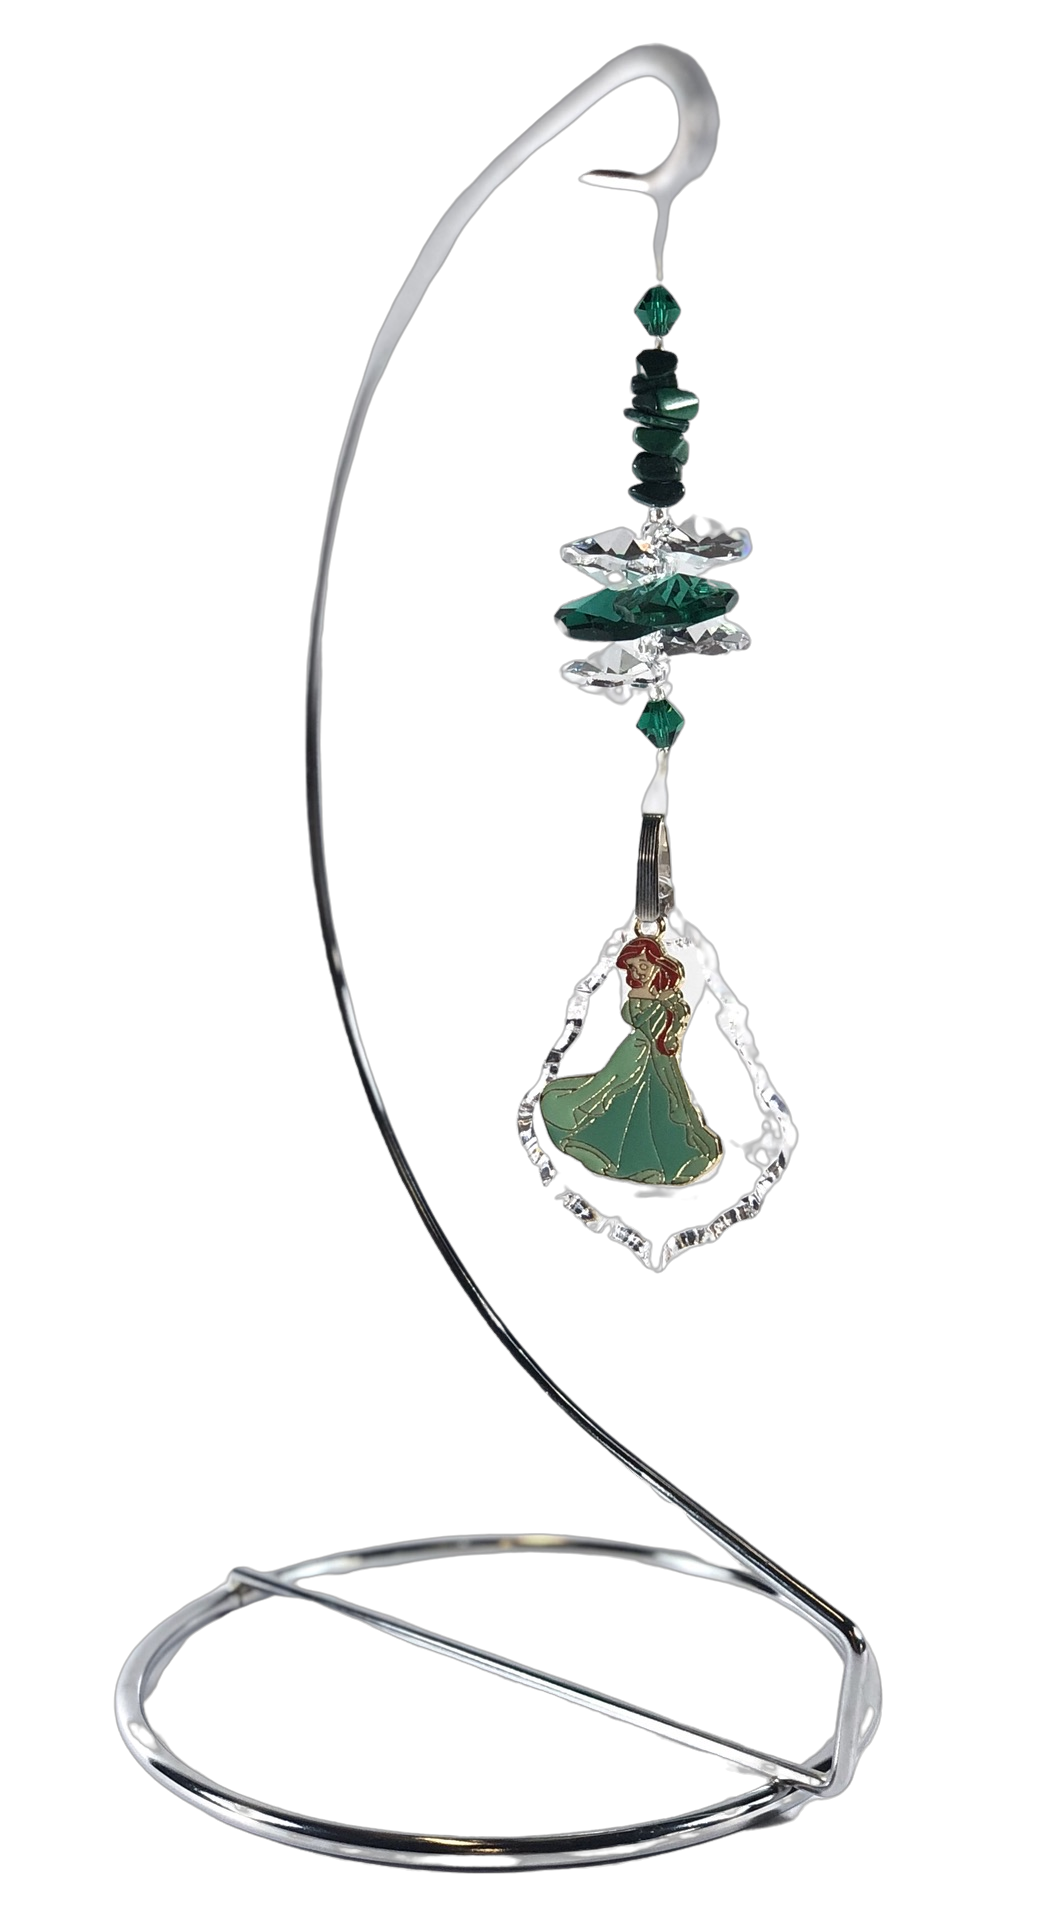 The Little Mermaid - Ariel crystal suncatcher is decorated with malachite gemstones and come on this amazing stand.